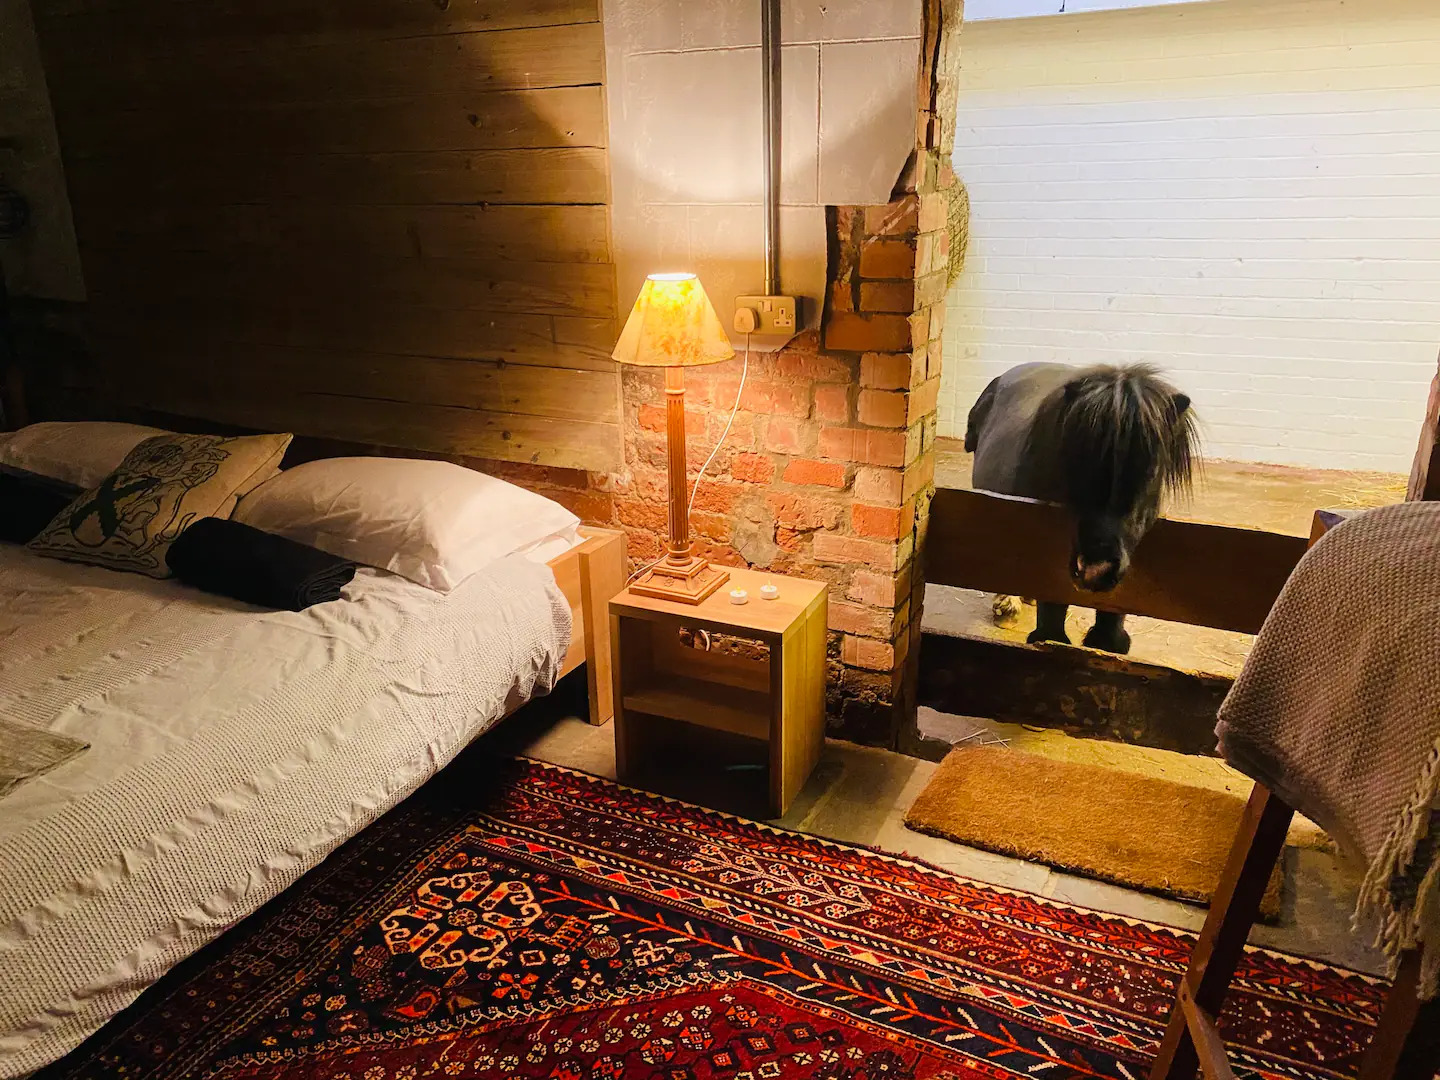 Basil the Shetland Pony looking into the bedroom of the Basils Barn Airbnb